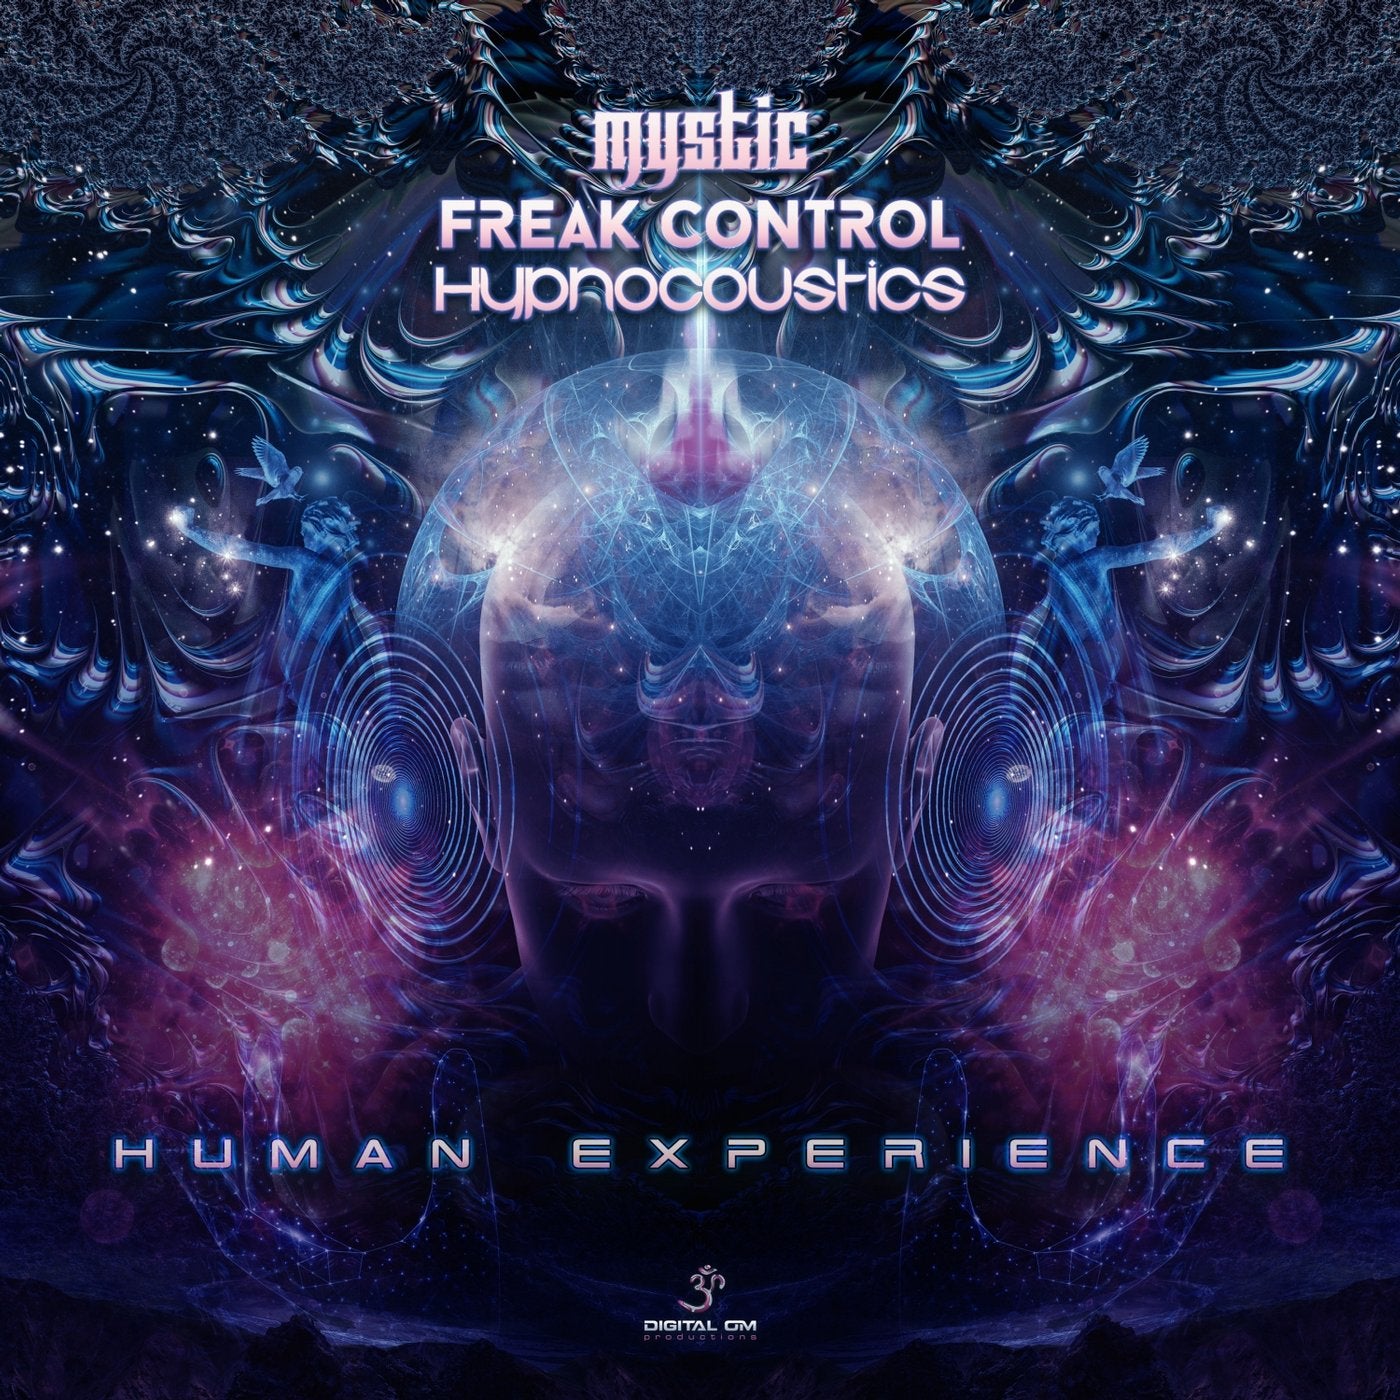 Control Freak. Music in the Human experience. Human album. Complicated - Human experience (Original Mix).